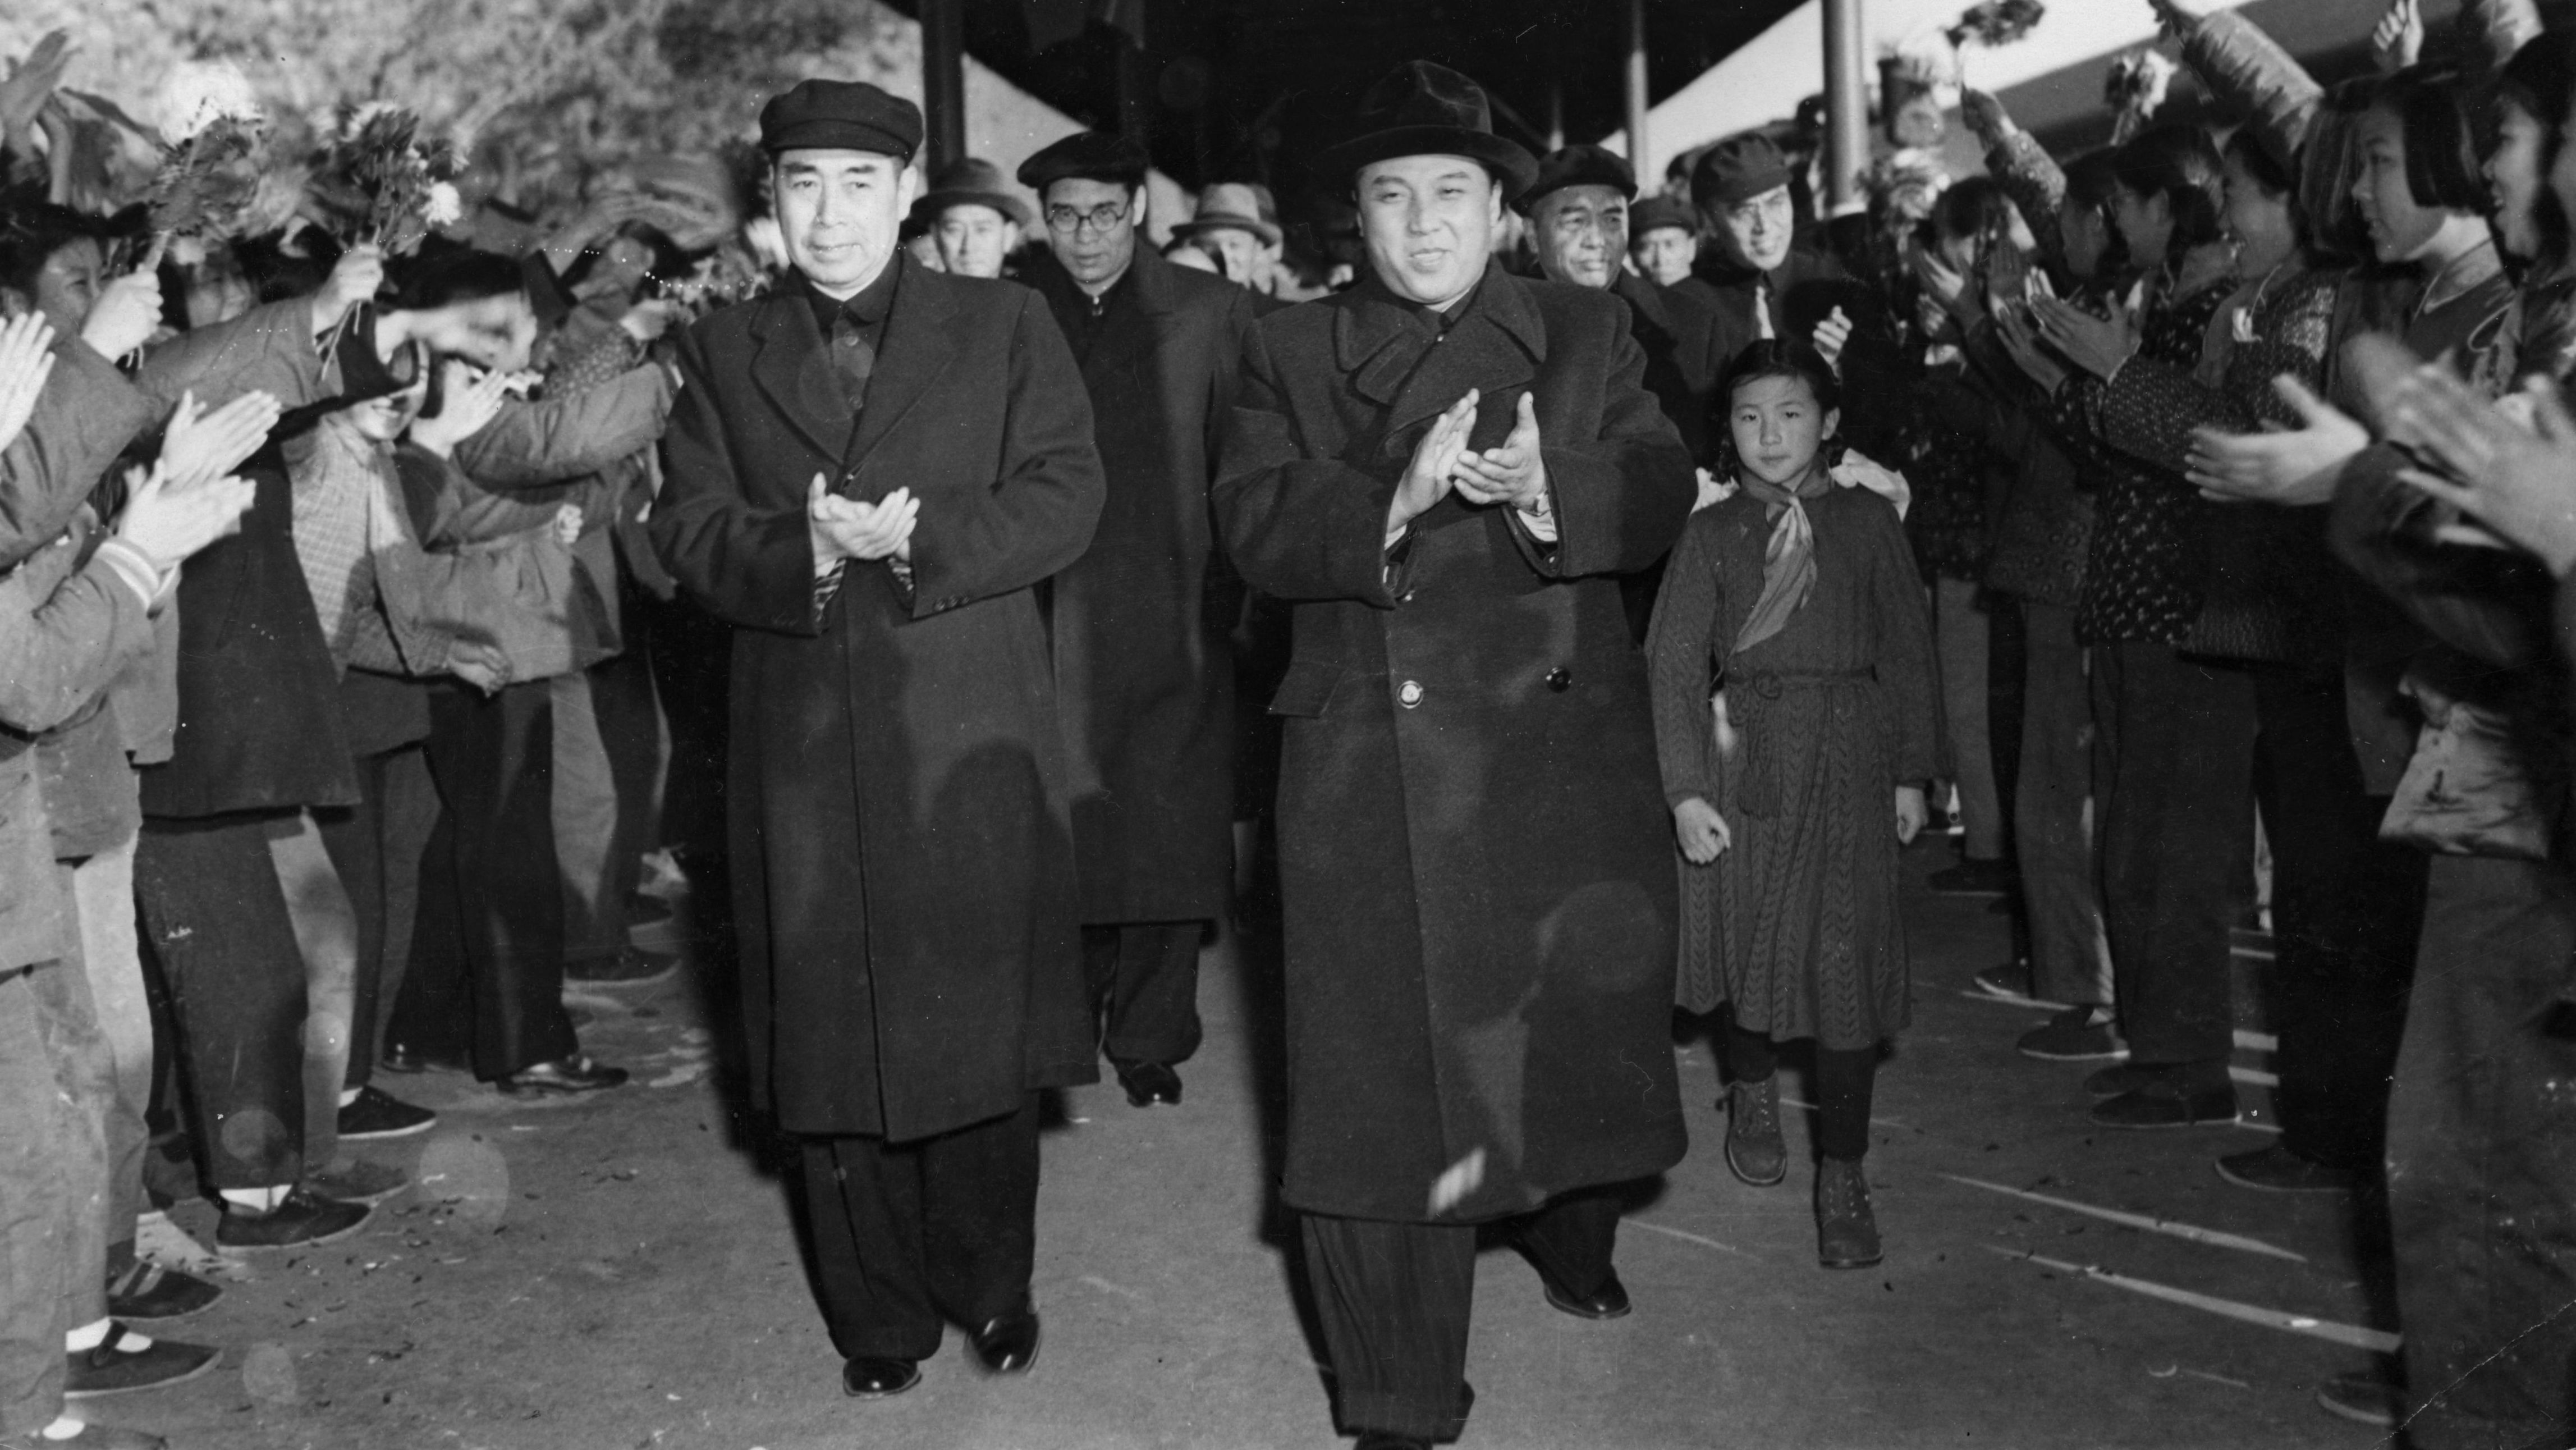 Zhou, left, walks with North Korean leader Kim Il Sung at a railway station in Beijing in November 1953. During the Korean War, Chinese troops <a href="https://www.cnn.com/2020/06/24/asia/korean-war-70th-anniversary-intl-hnk/index.html" target="_blank">intervened on the North Korean side.</a> These troops would inflict horrific losses on the US and South Korean troops they faced, eventually driving them out of North Korea completely. But China also suffered massive losses; more than 180,000 of its troops were killed.